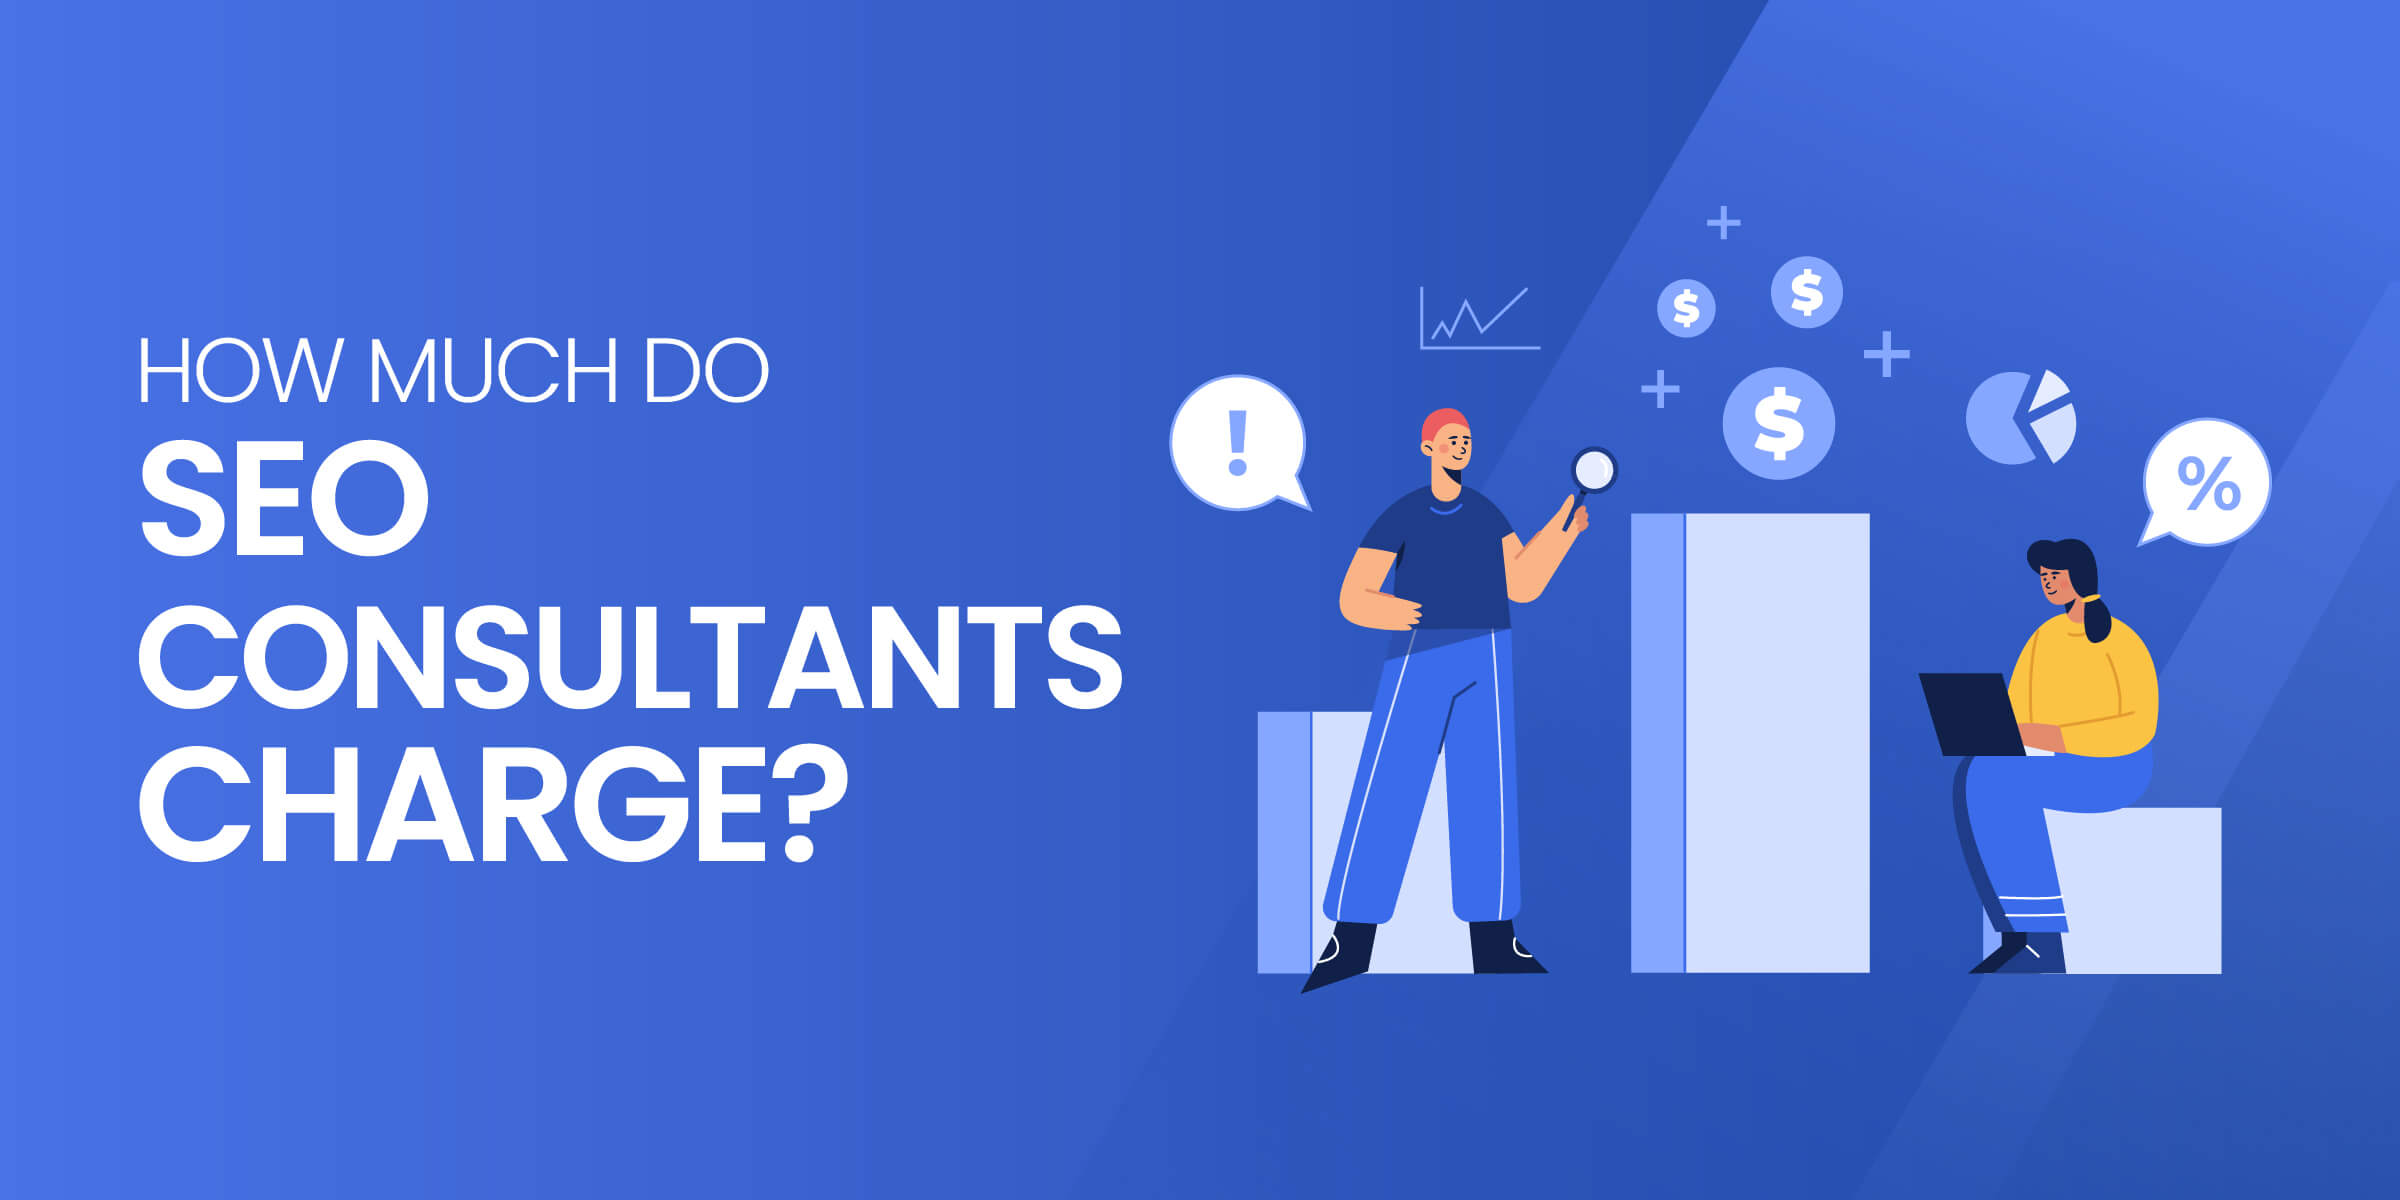 How Much Do SEO Consultants Charge